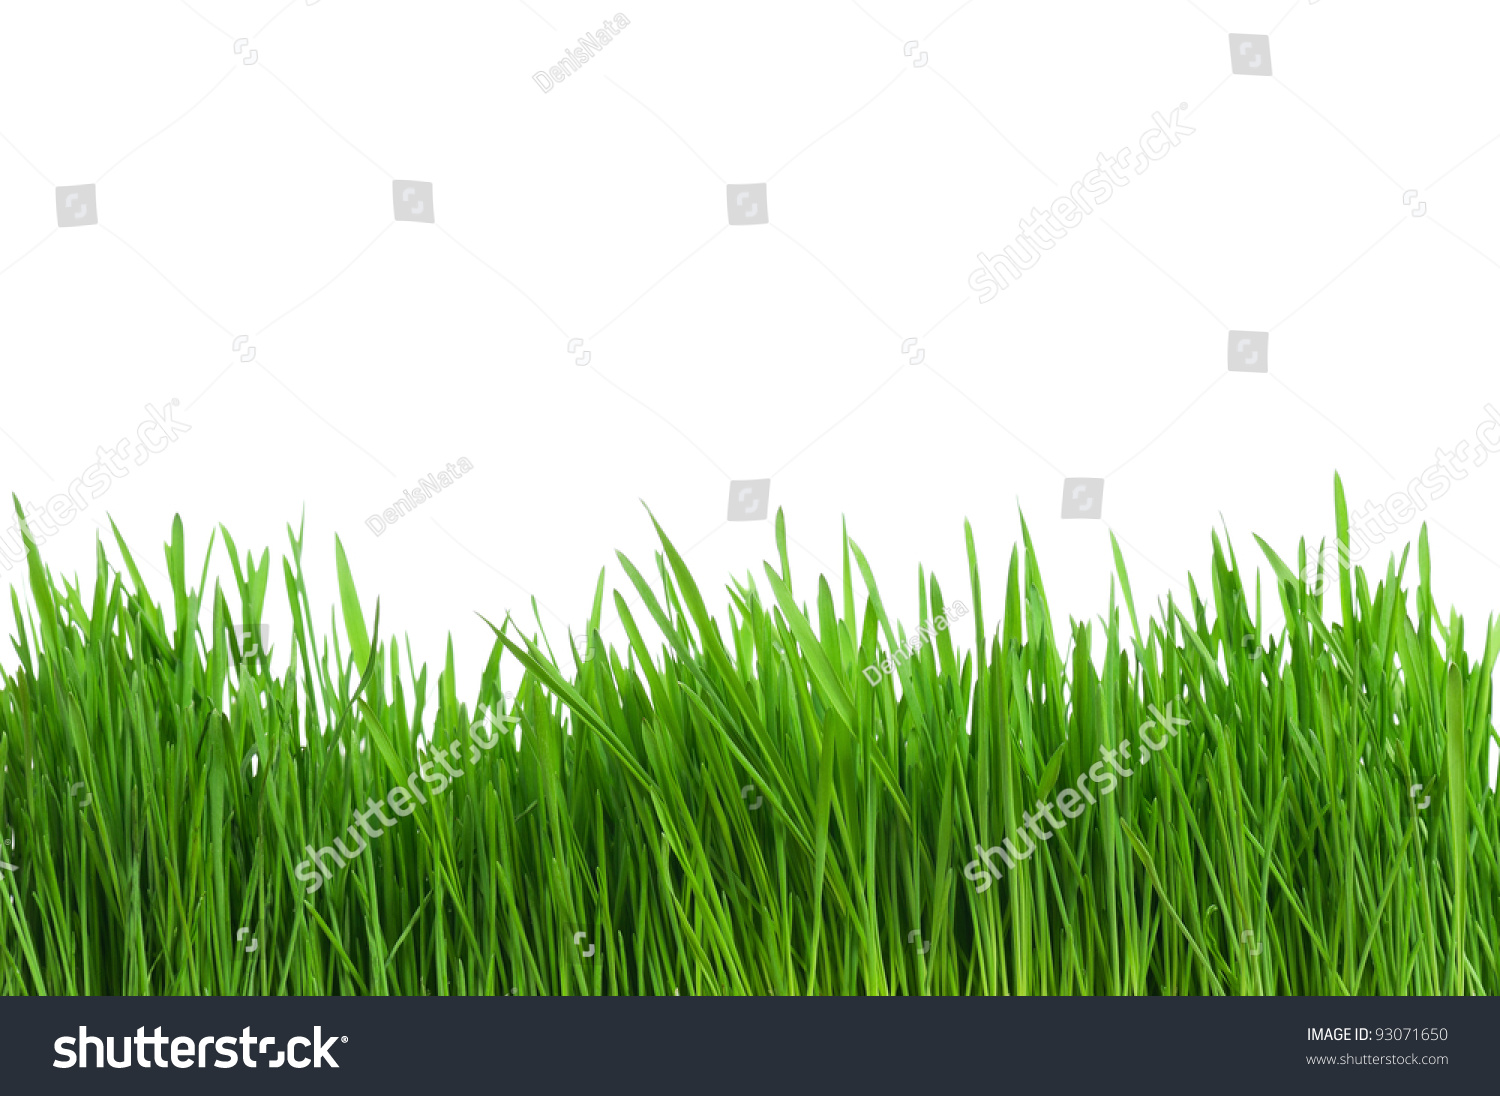 Fresh green wheat grass isolated on white background #93071650